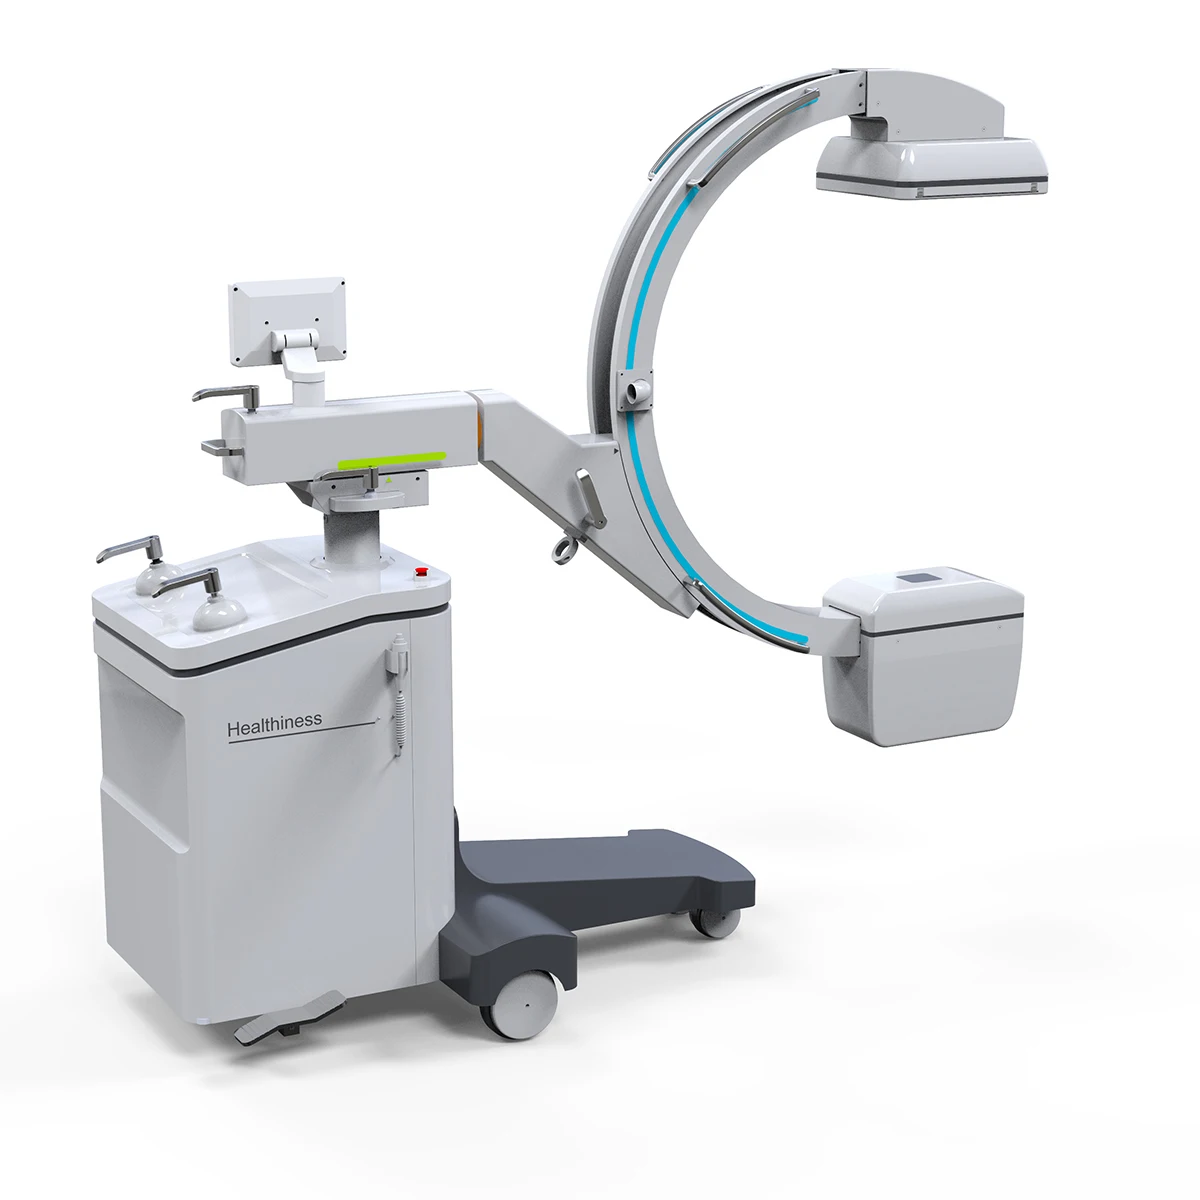 Mobile c arm x-ray machine high frequency digital x ray machine mobile x-ray machine MSLCX50